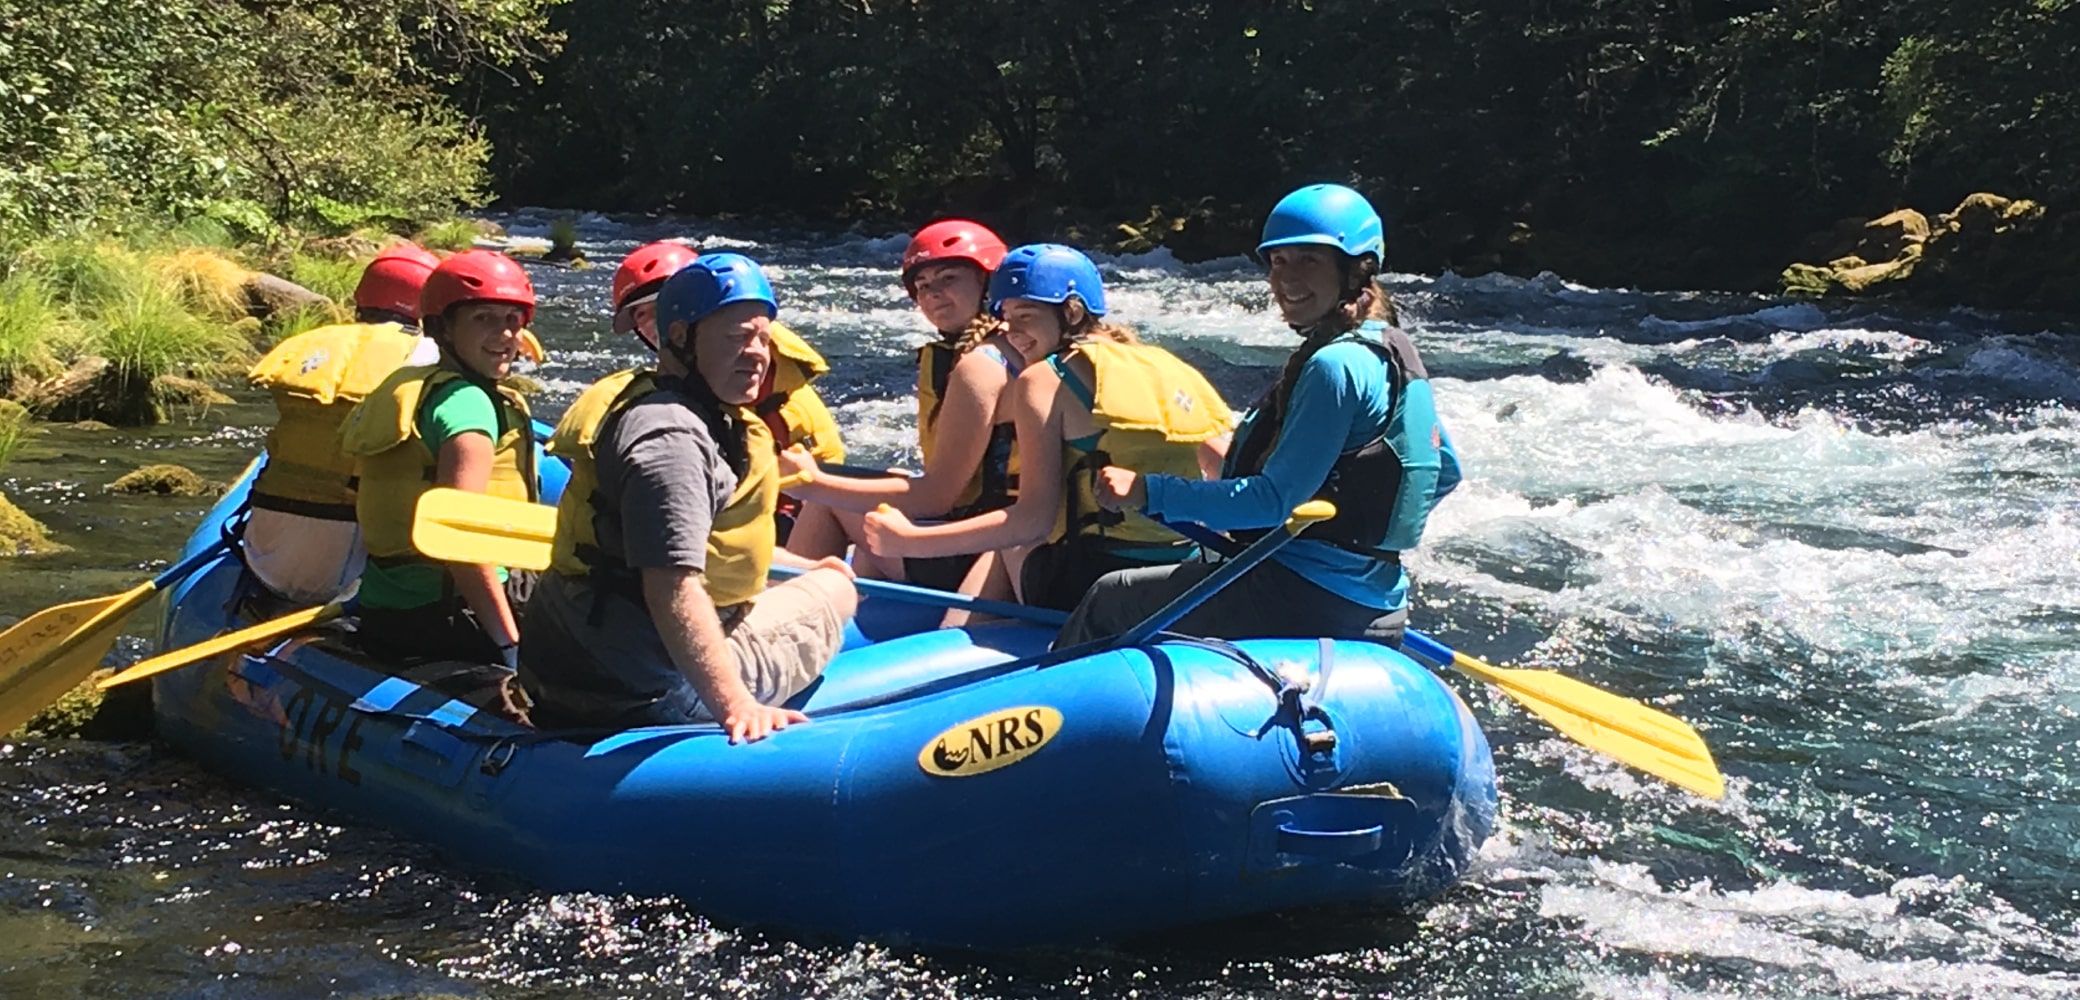 A group of seven guided white water rafters smile as they navigate rapids on the Sandy River.